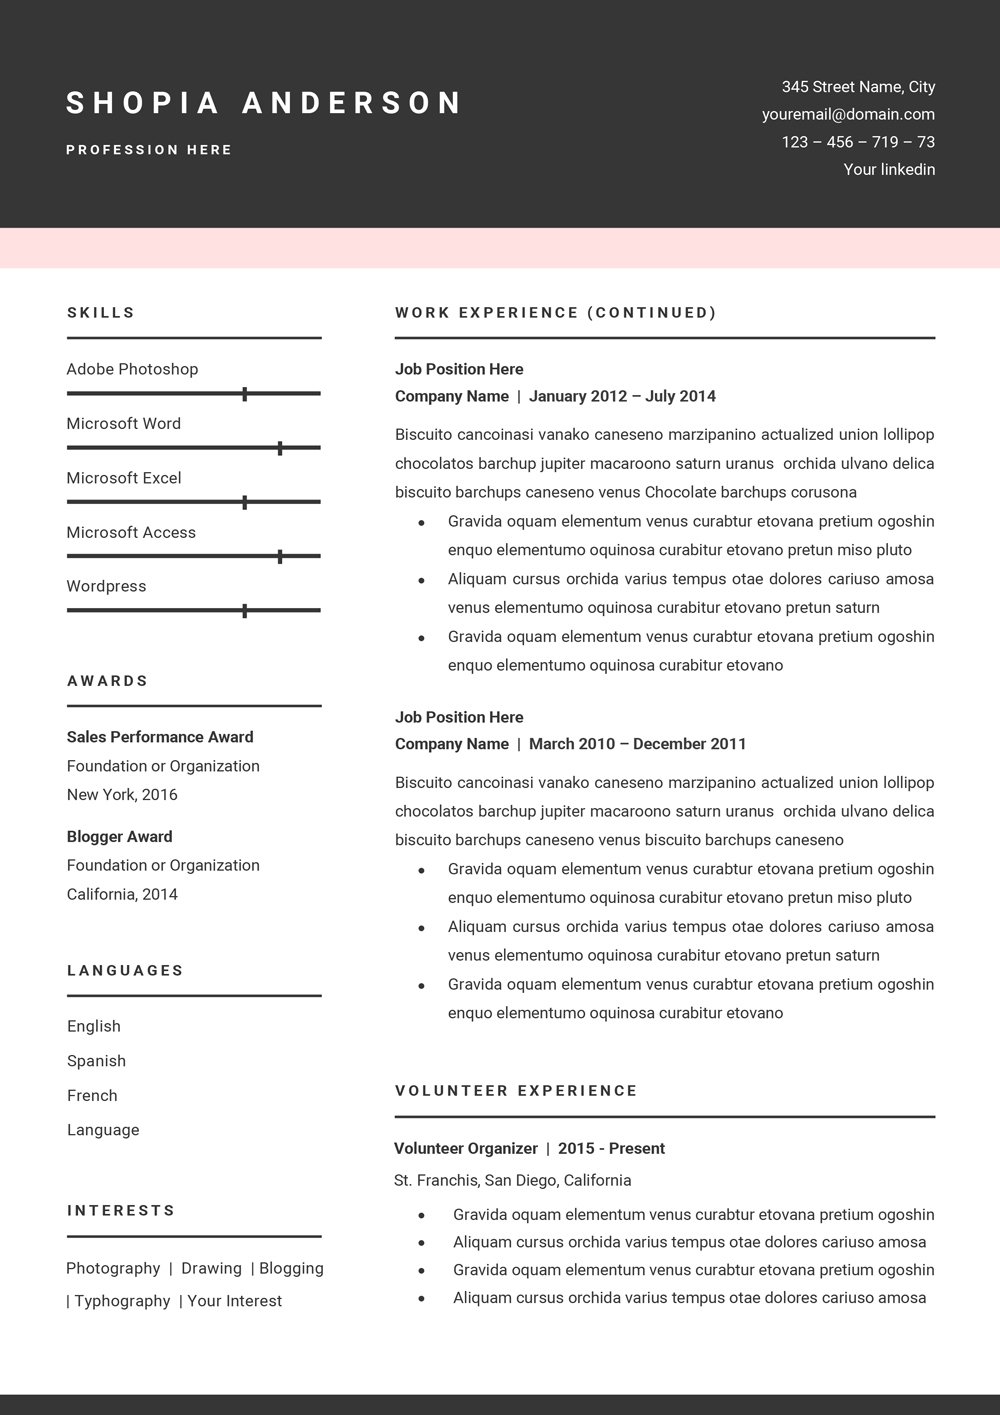 shopia anderson resume282pages29 a4 2 710